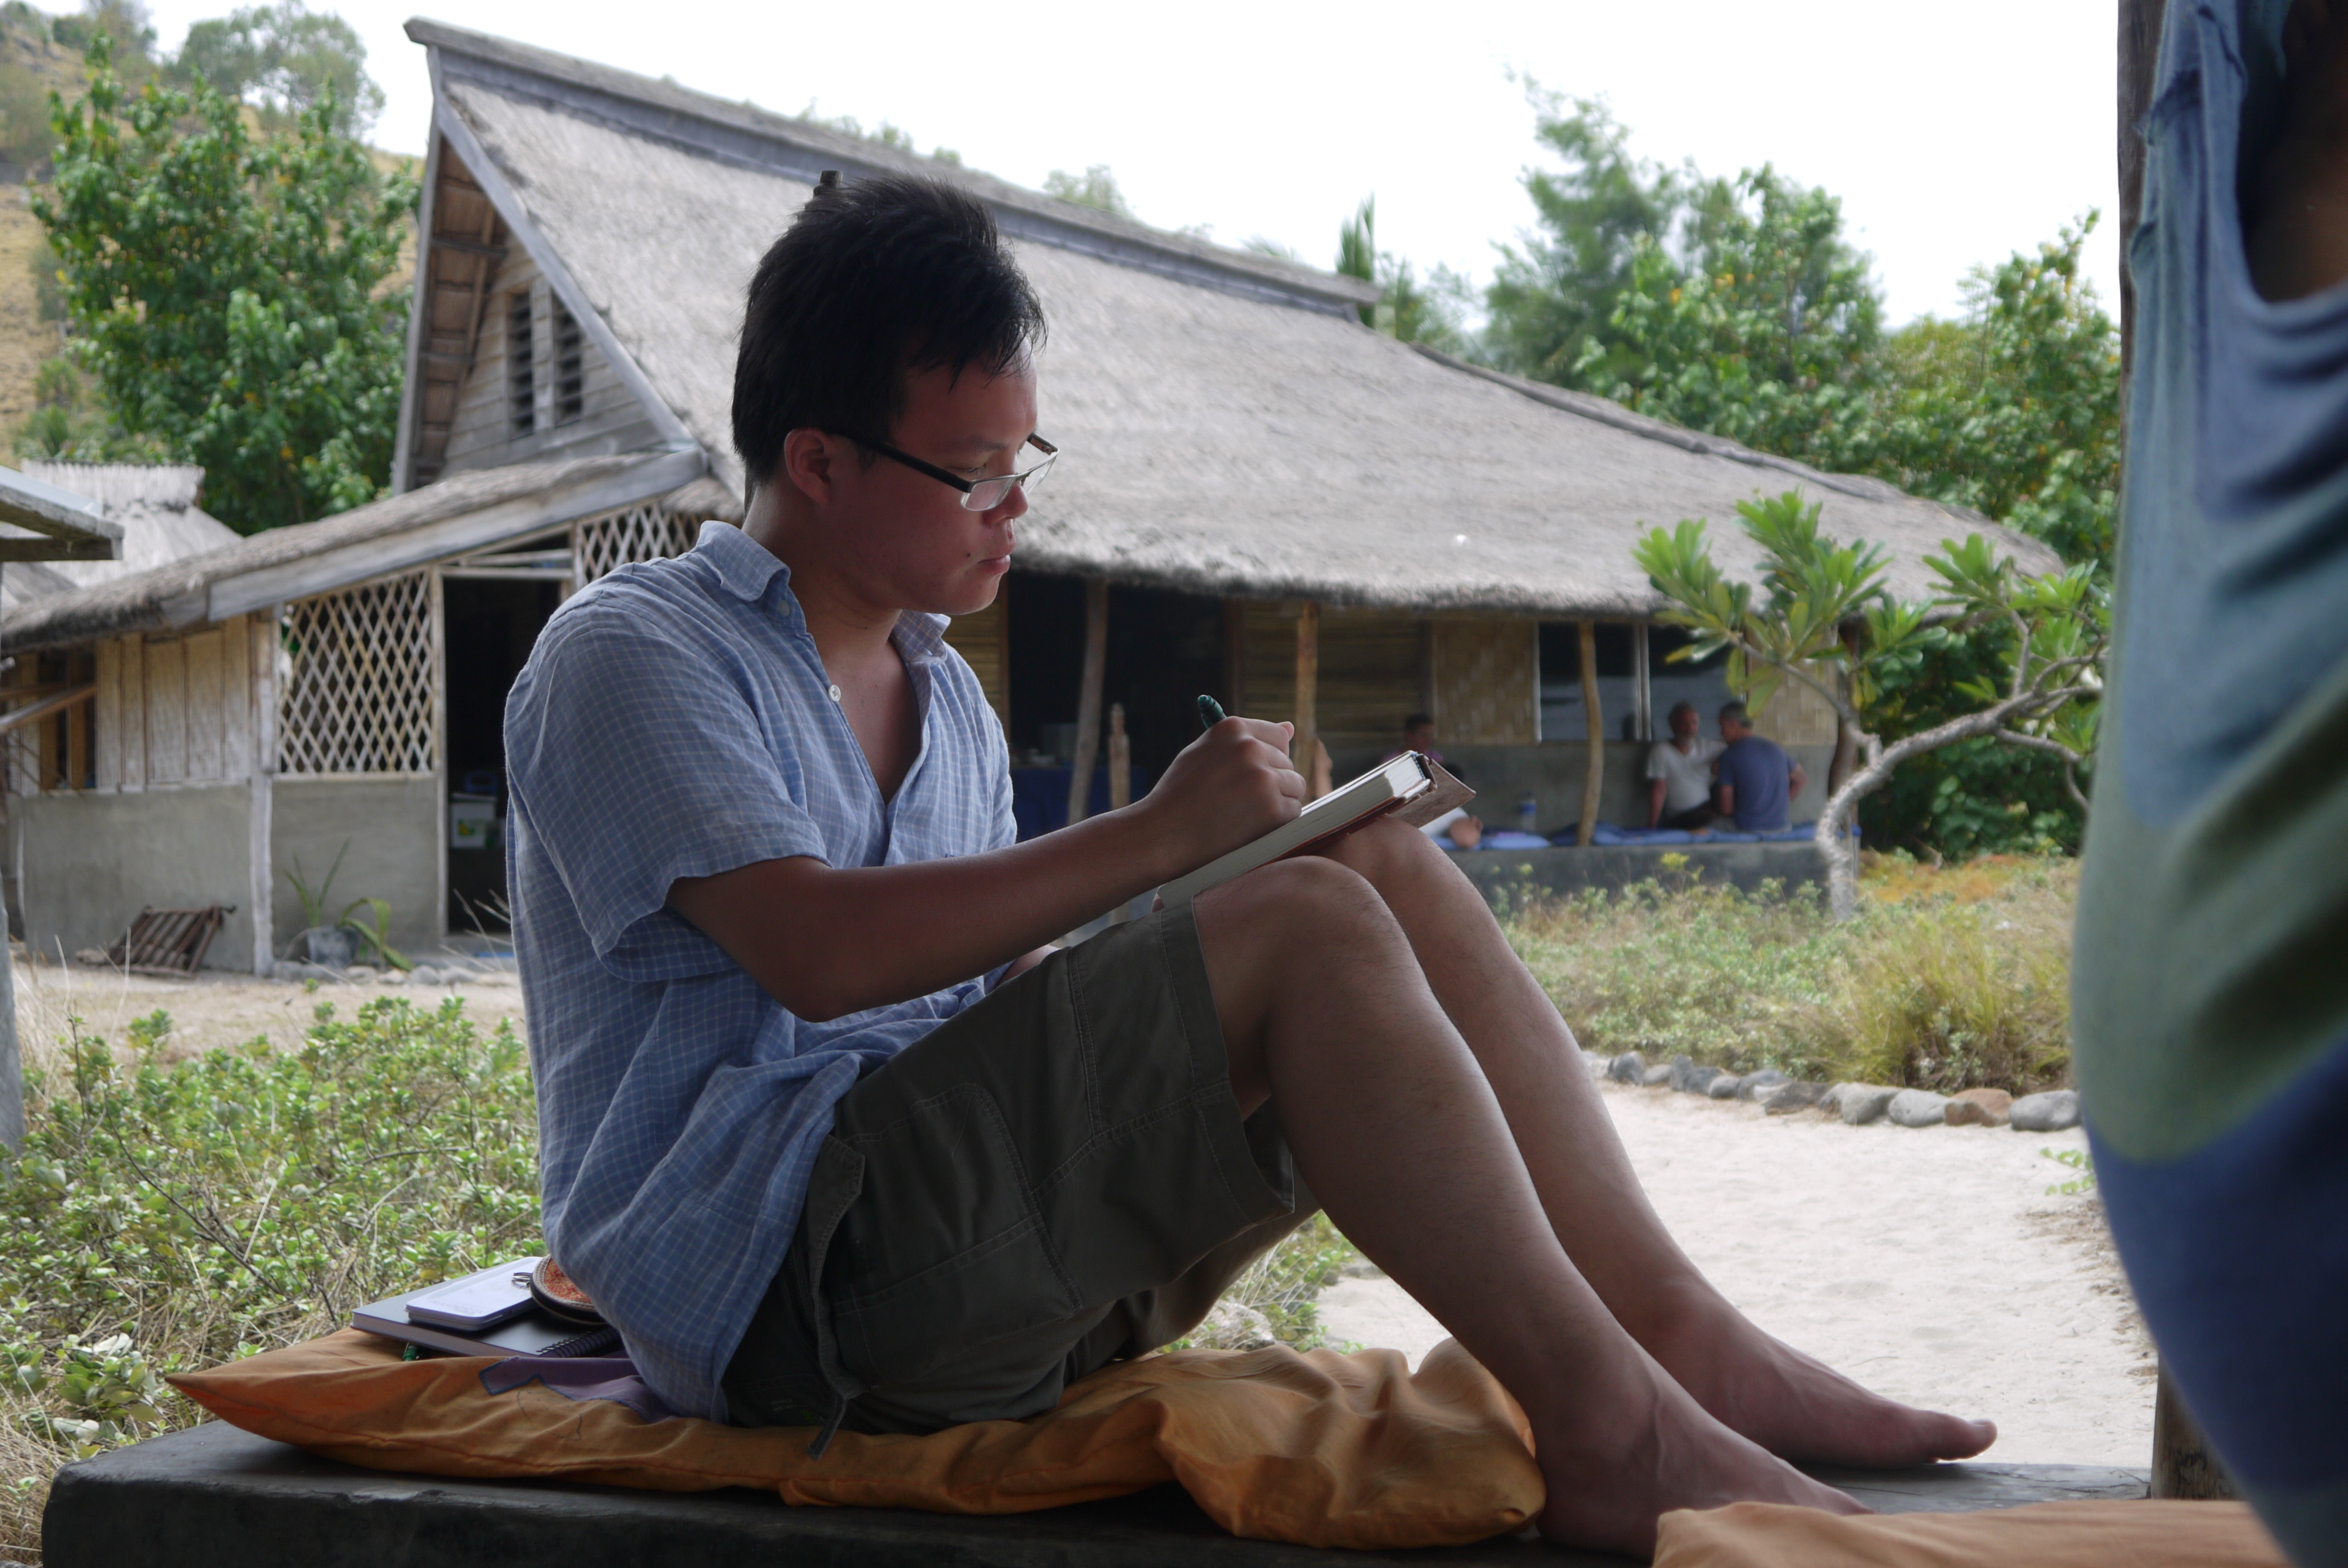 Palms Encounter participant Lawrence journaling on Atauro Island